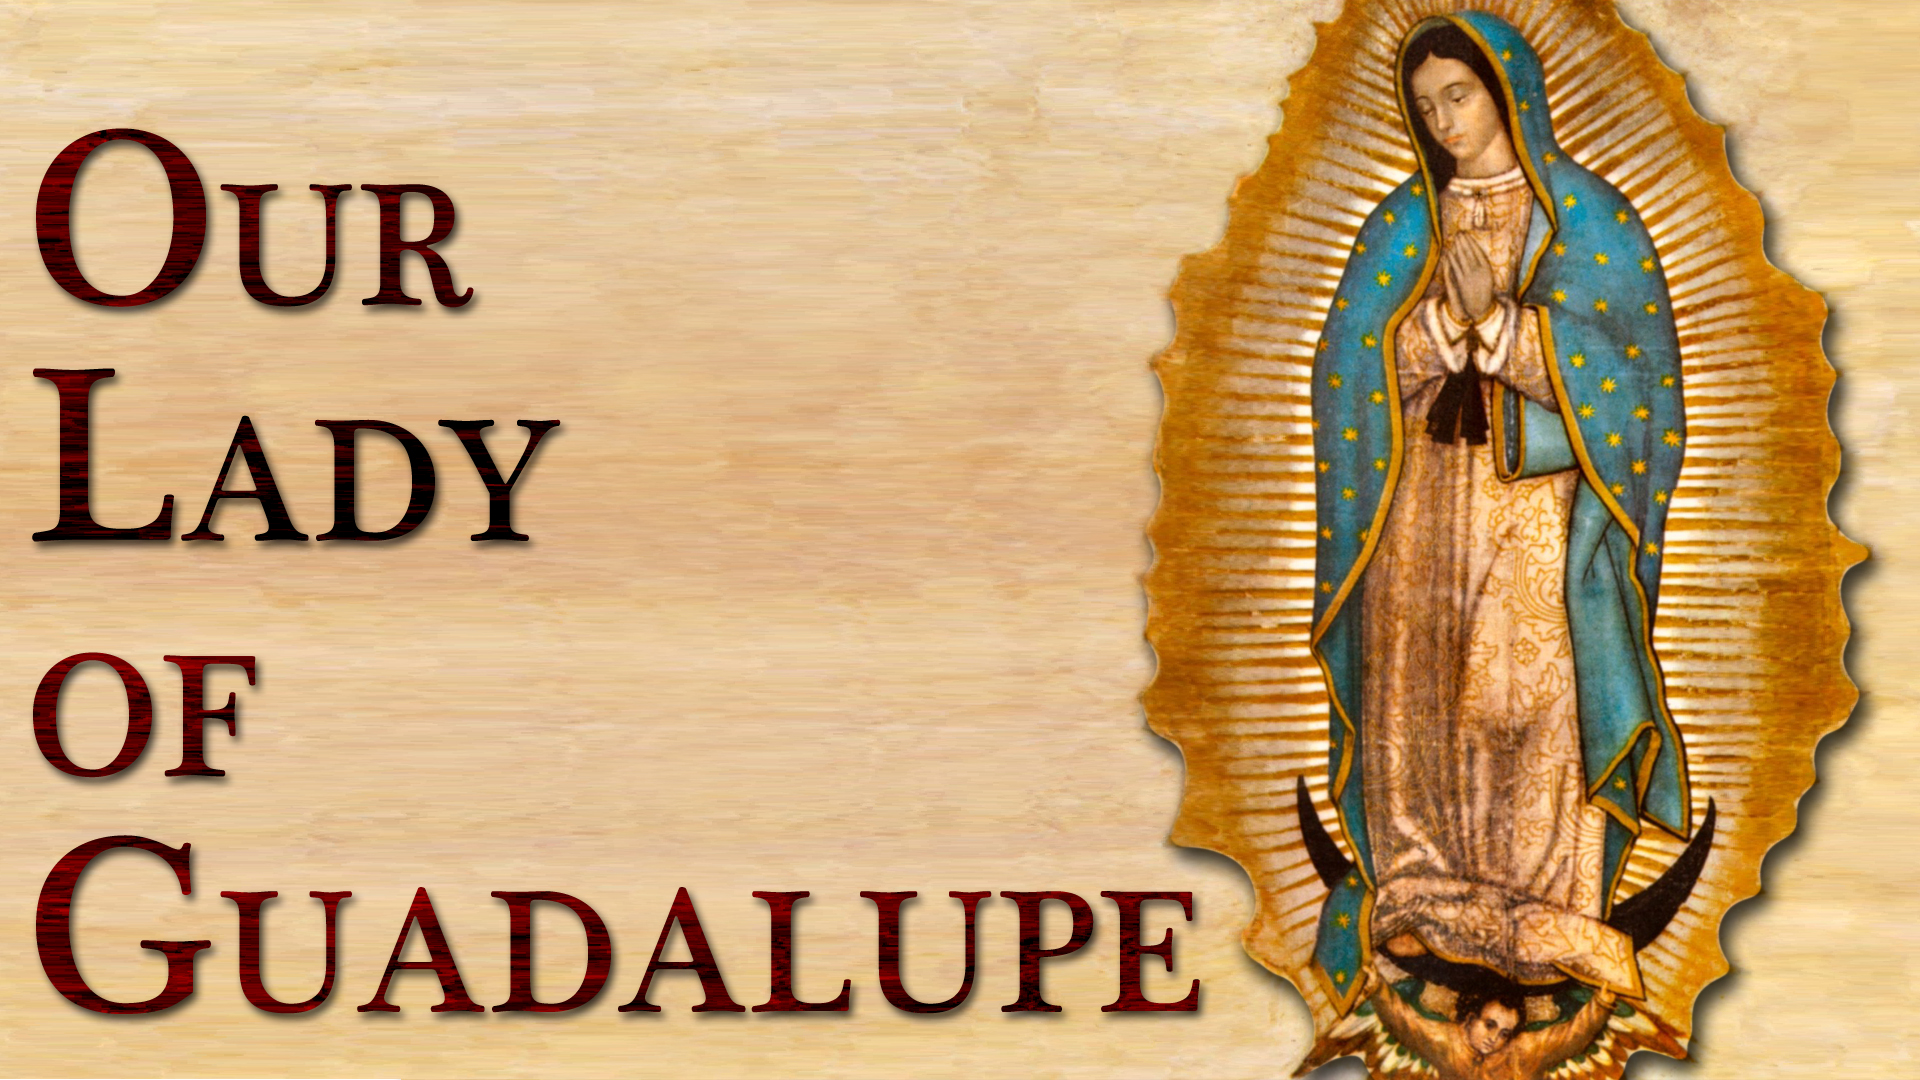 Our Lady Of Guadalupe Mass And Potluck Dinner St Joseph On